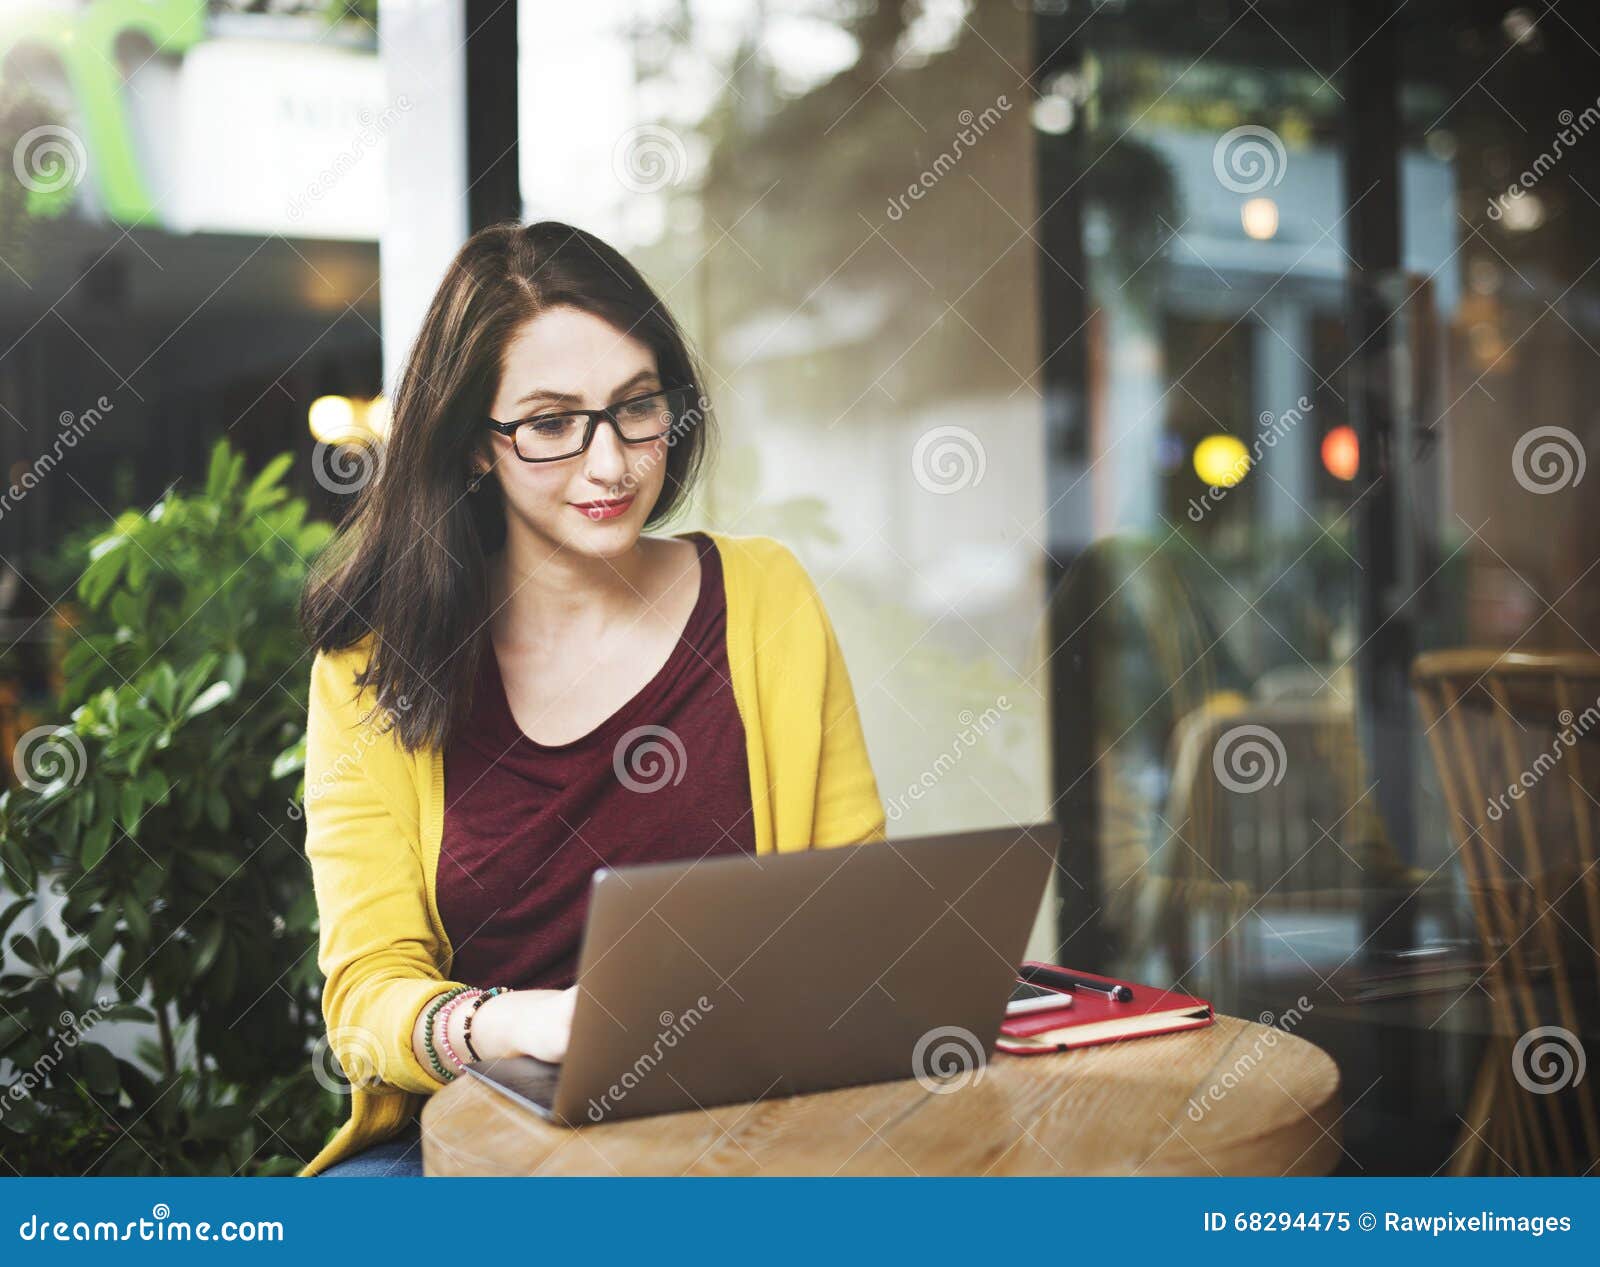 woman laptop browsing searching social networking technology con